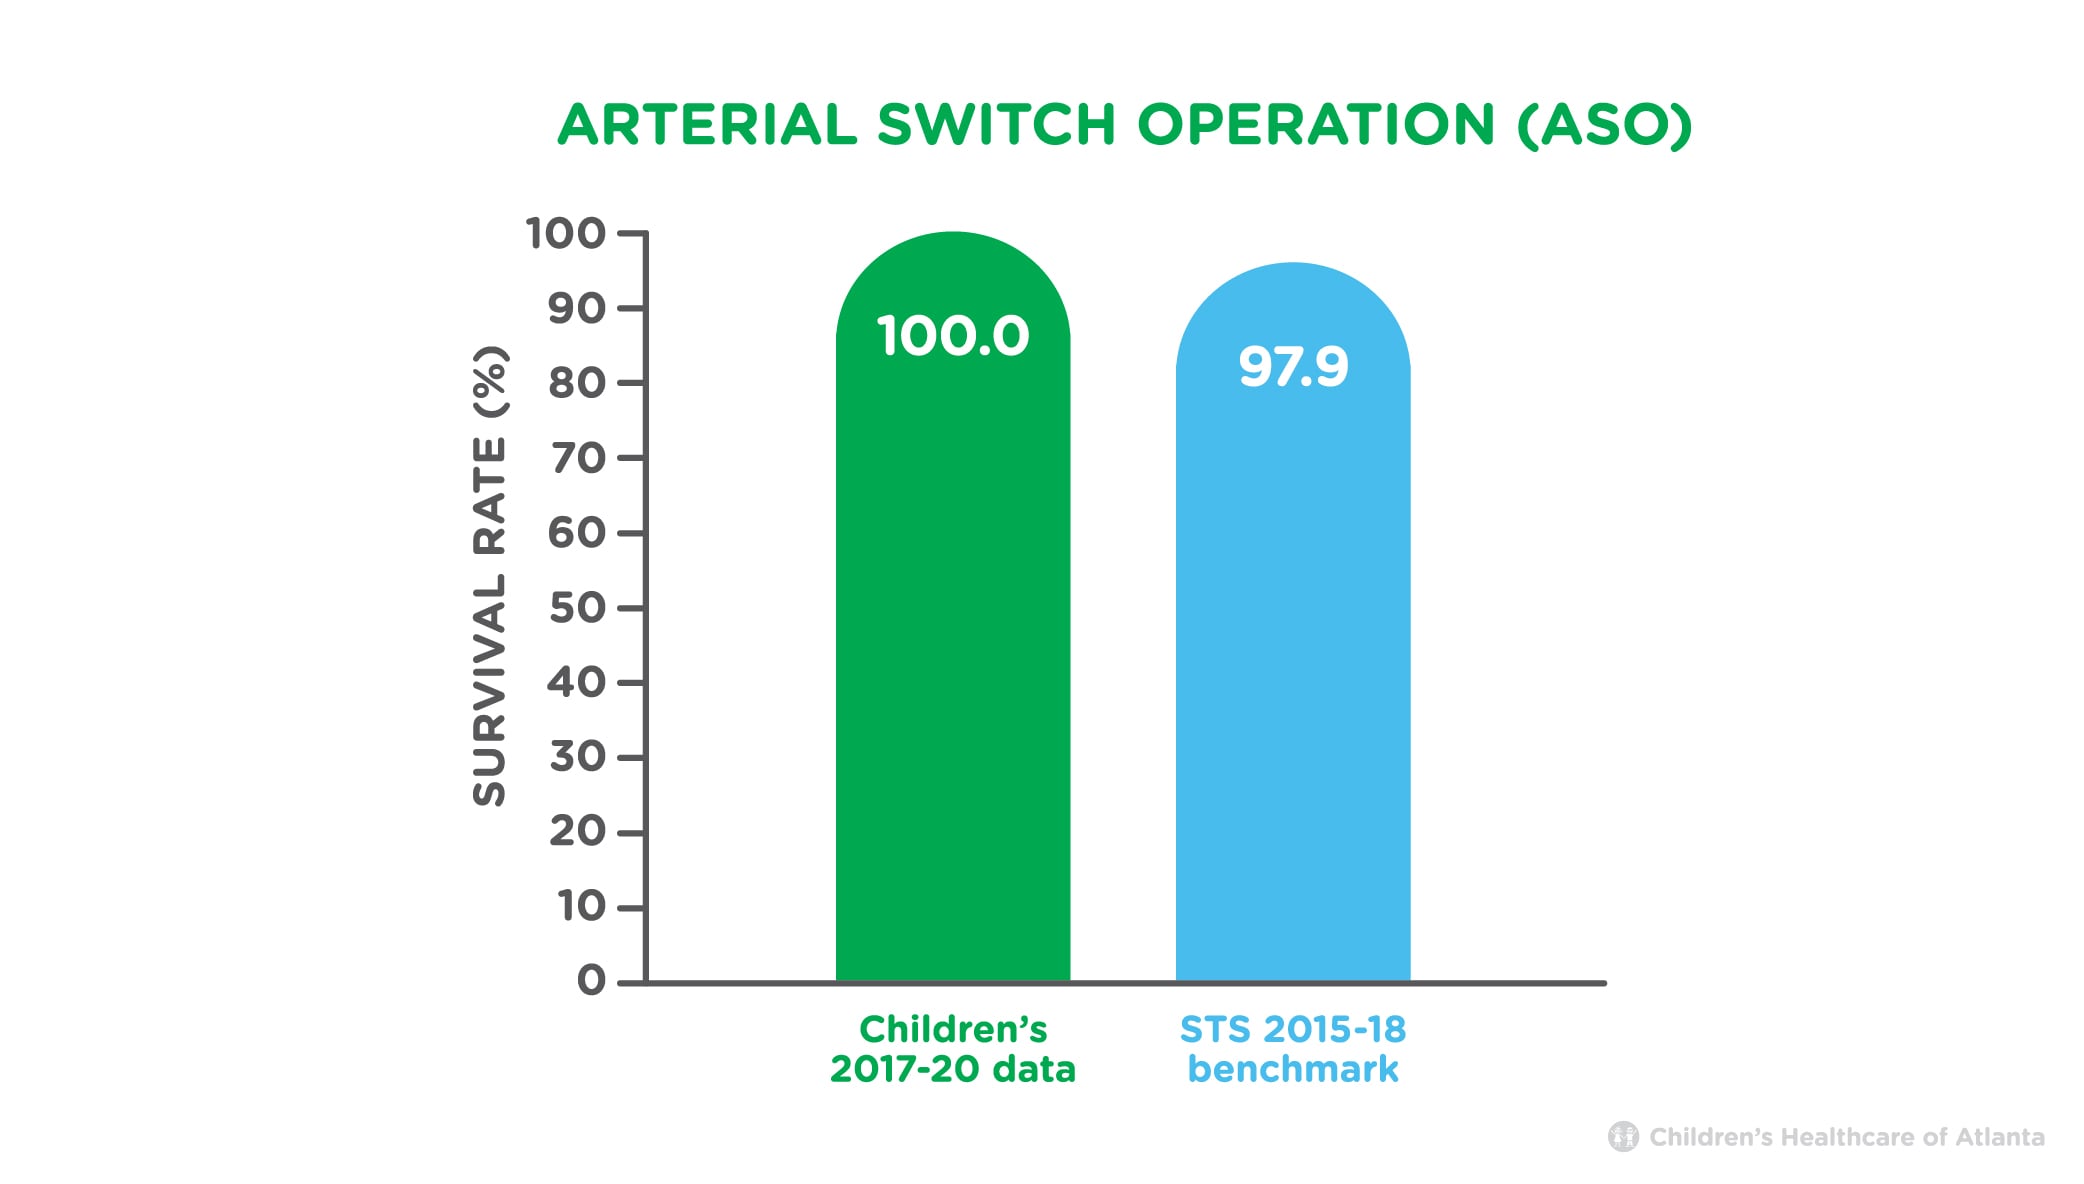 Arterial Switch Operation Survival Rate